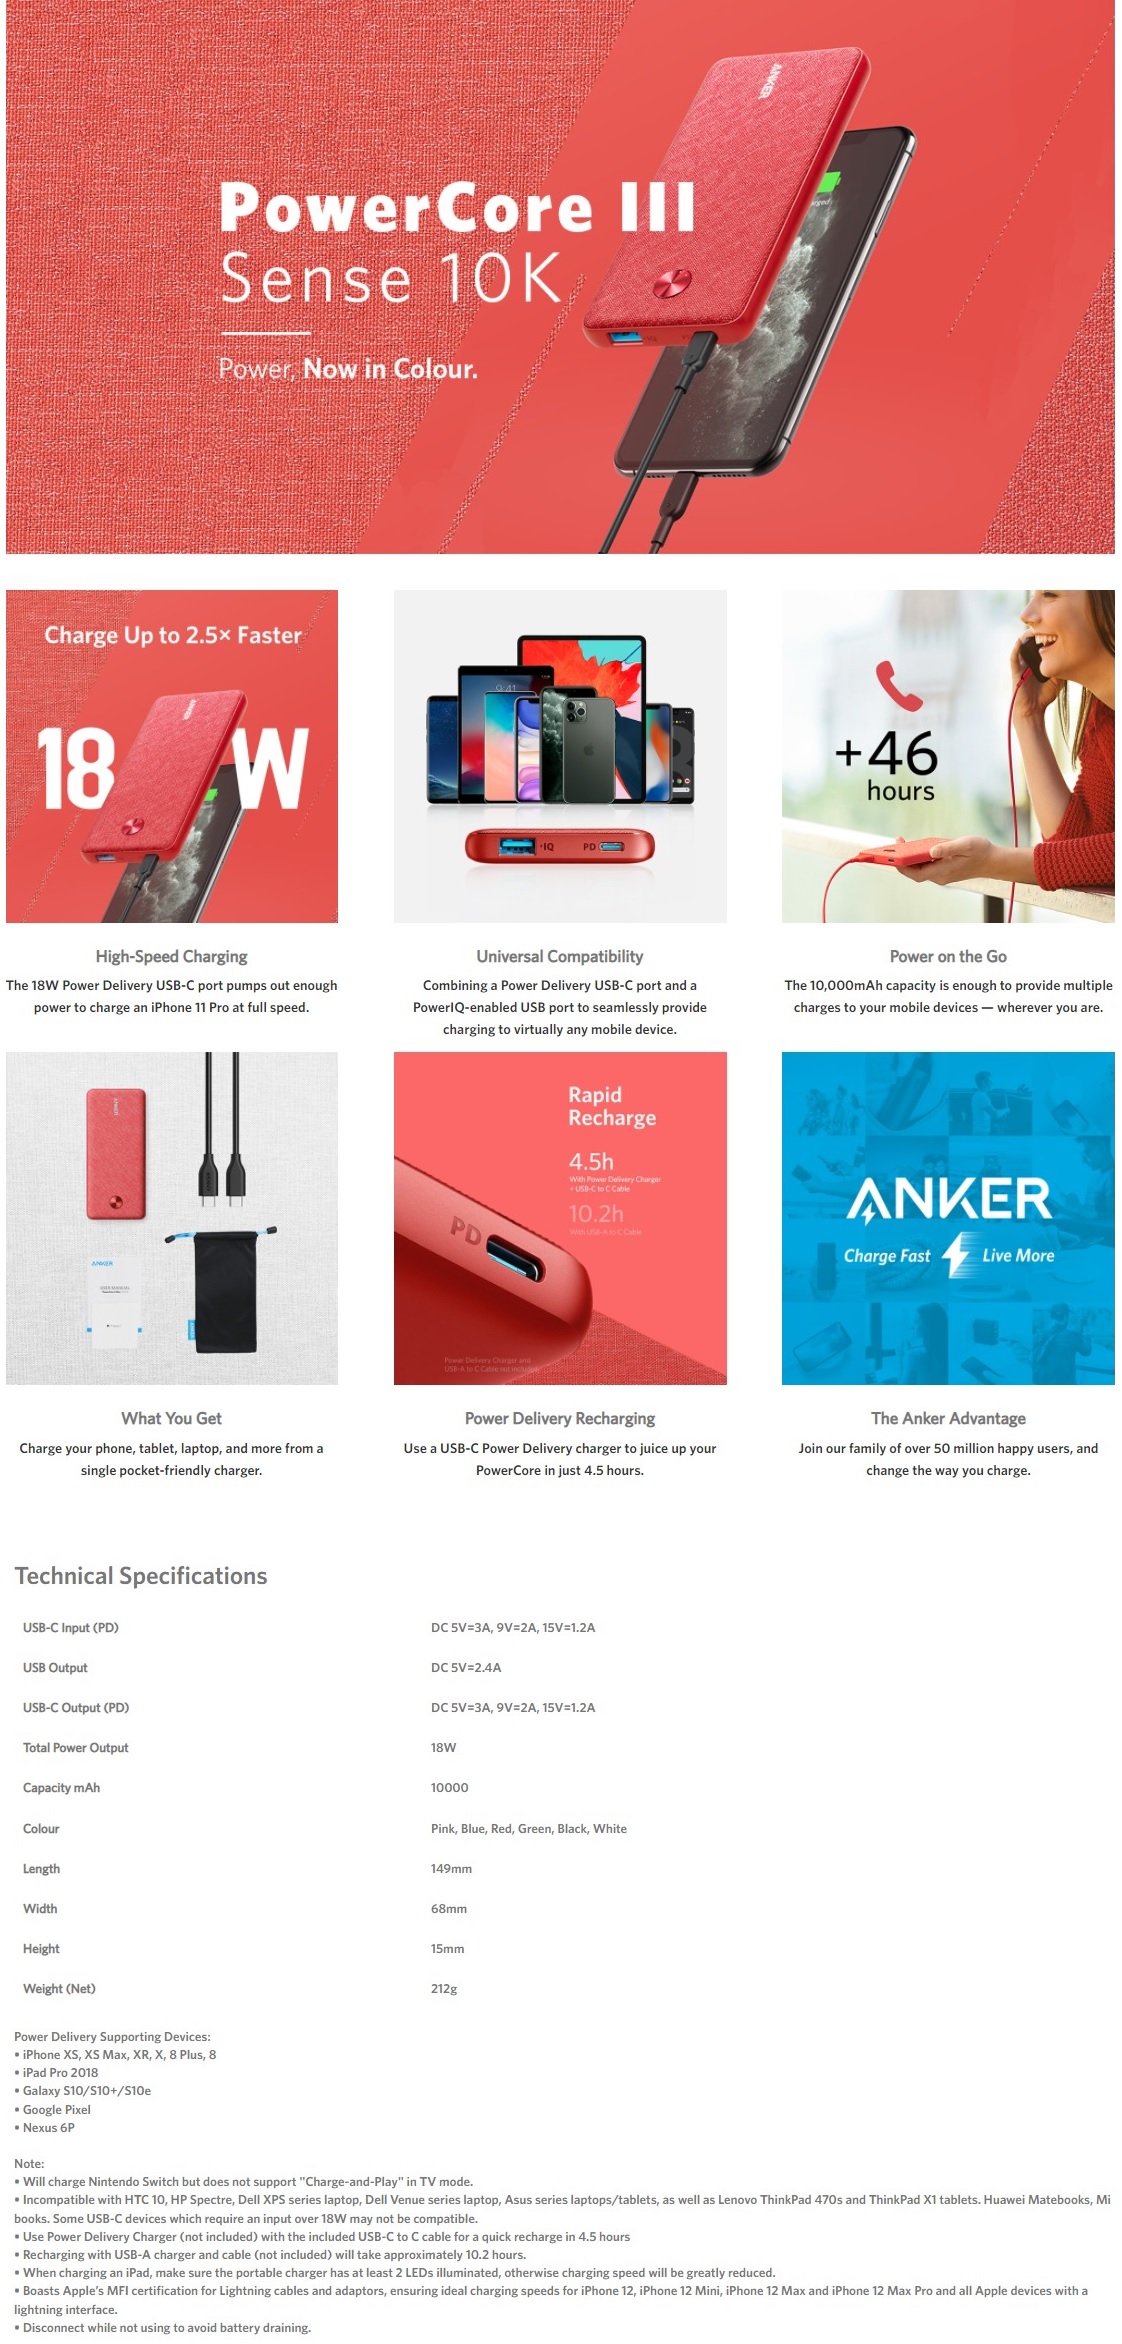 A large marketing image providing additional information about the product ANKER PowerCore III Sense 10K - Blue Fabric - Additional alt info not provided